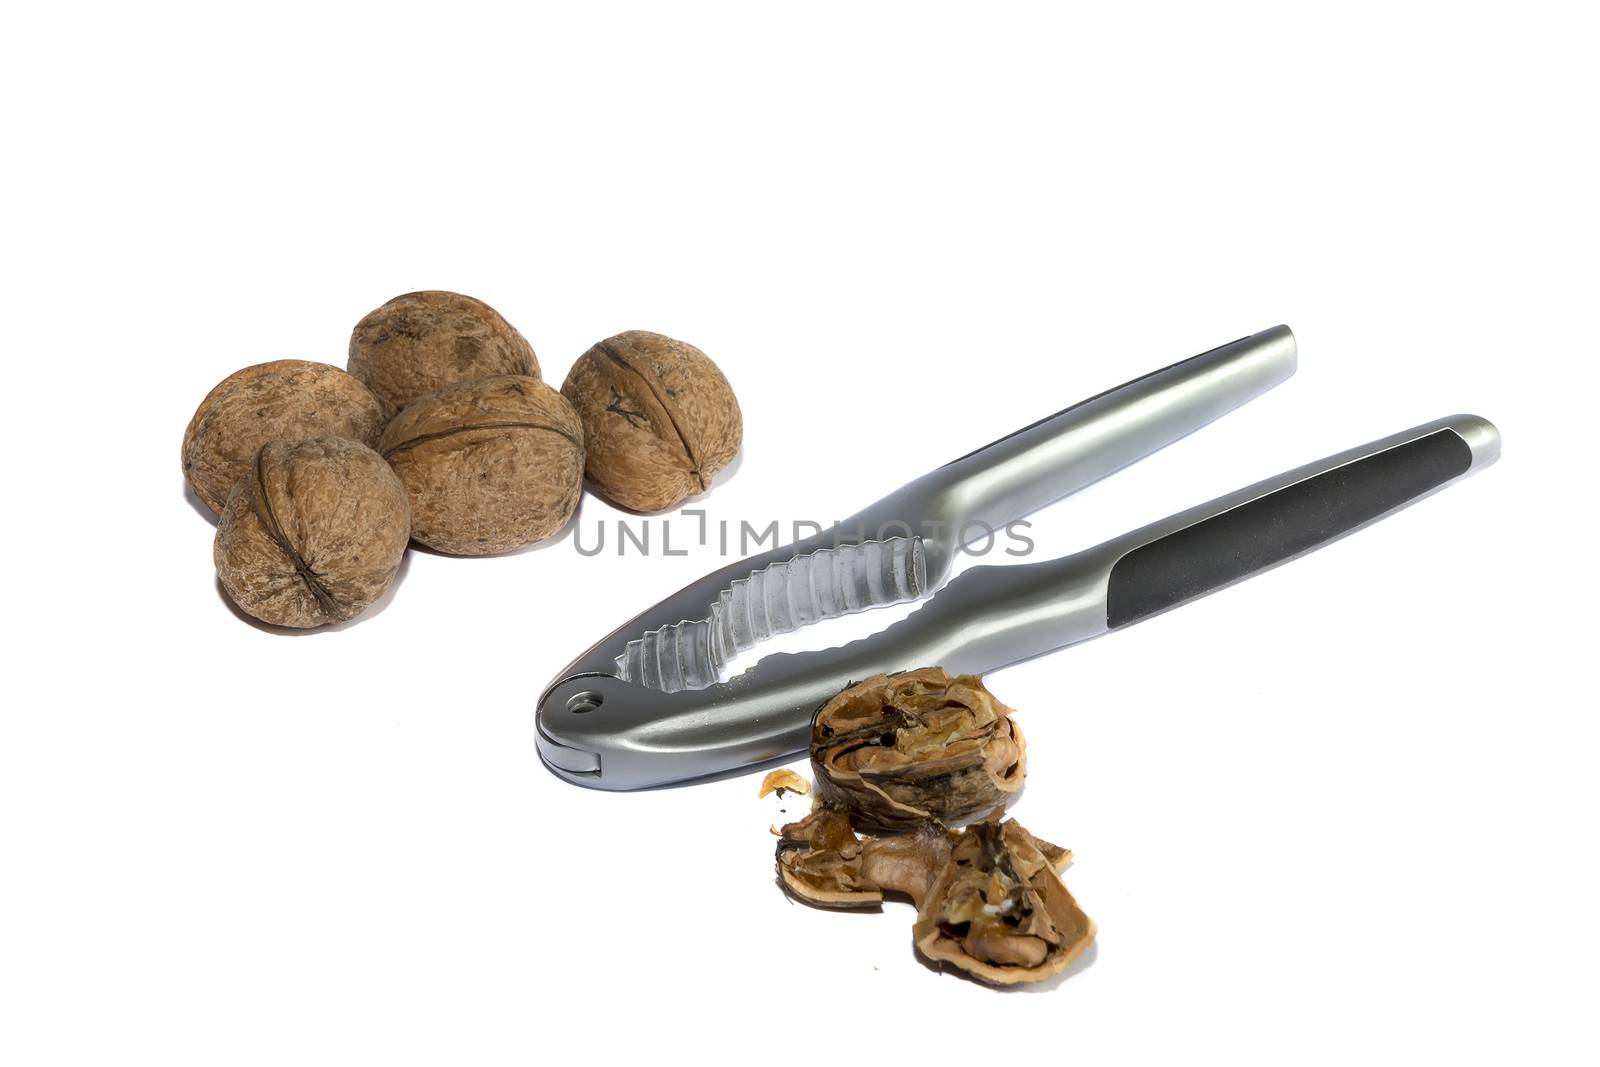 Group of walnuts and broken walnuts with a Nutcracker, isolated  on white background